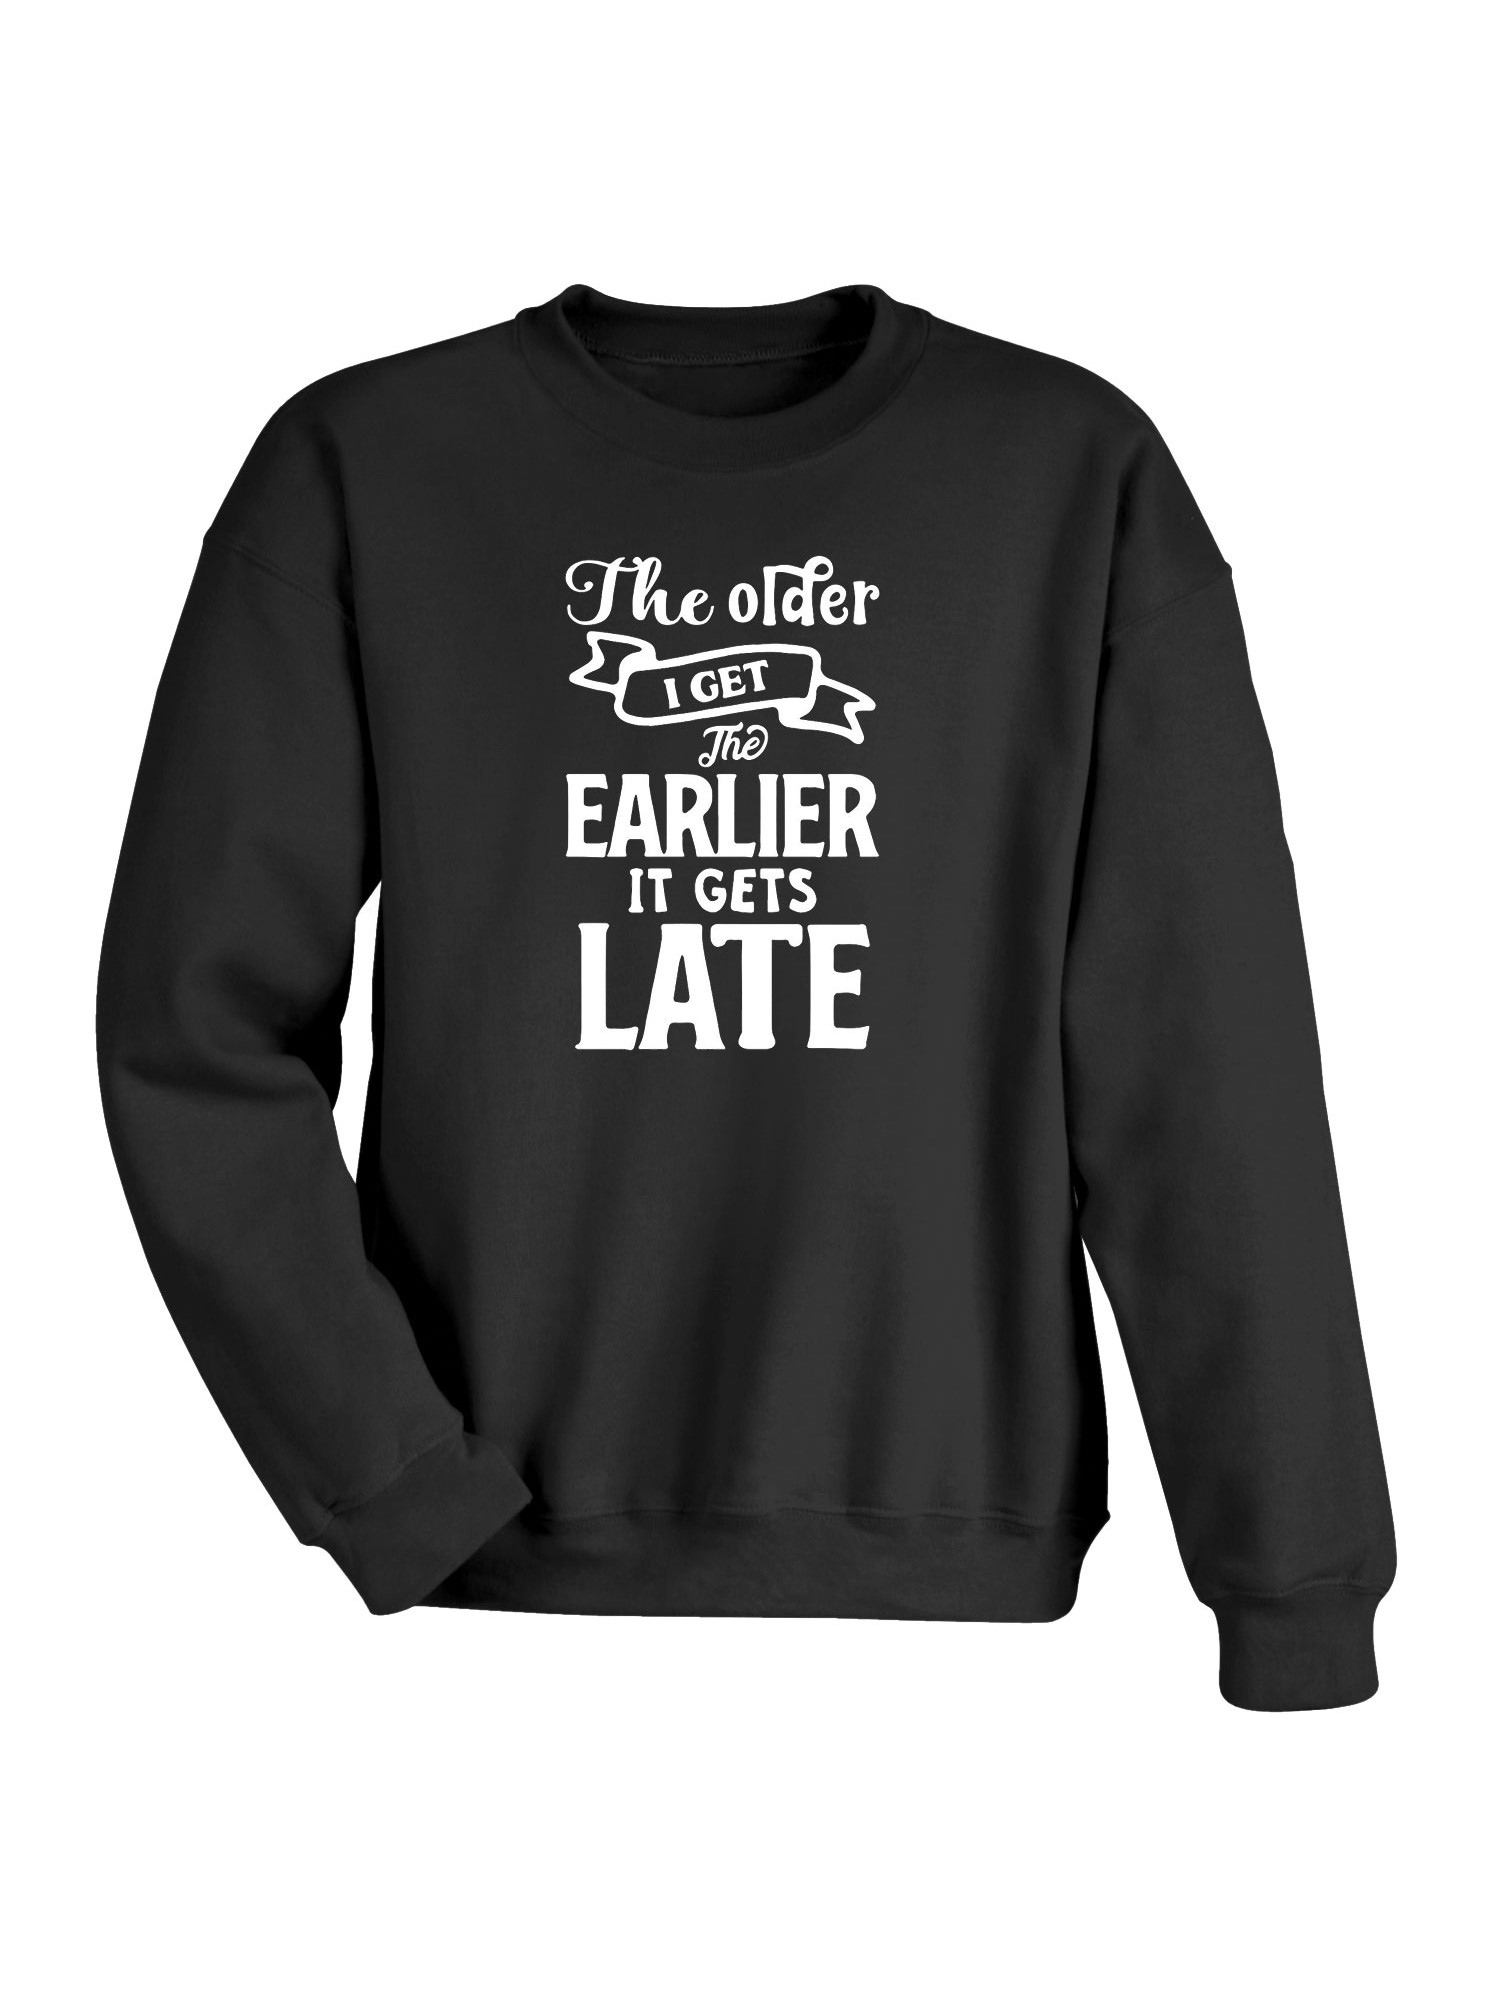 The Older I Get, The Earlier It Gets Late T-Shirt or Sweatshirt